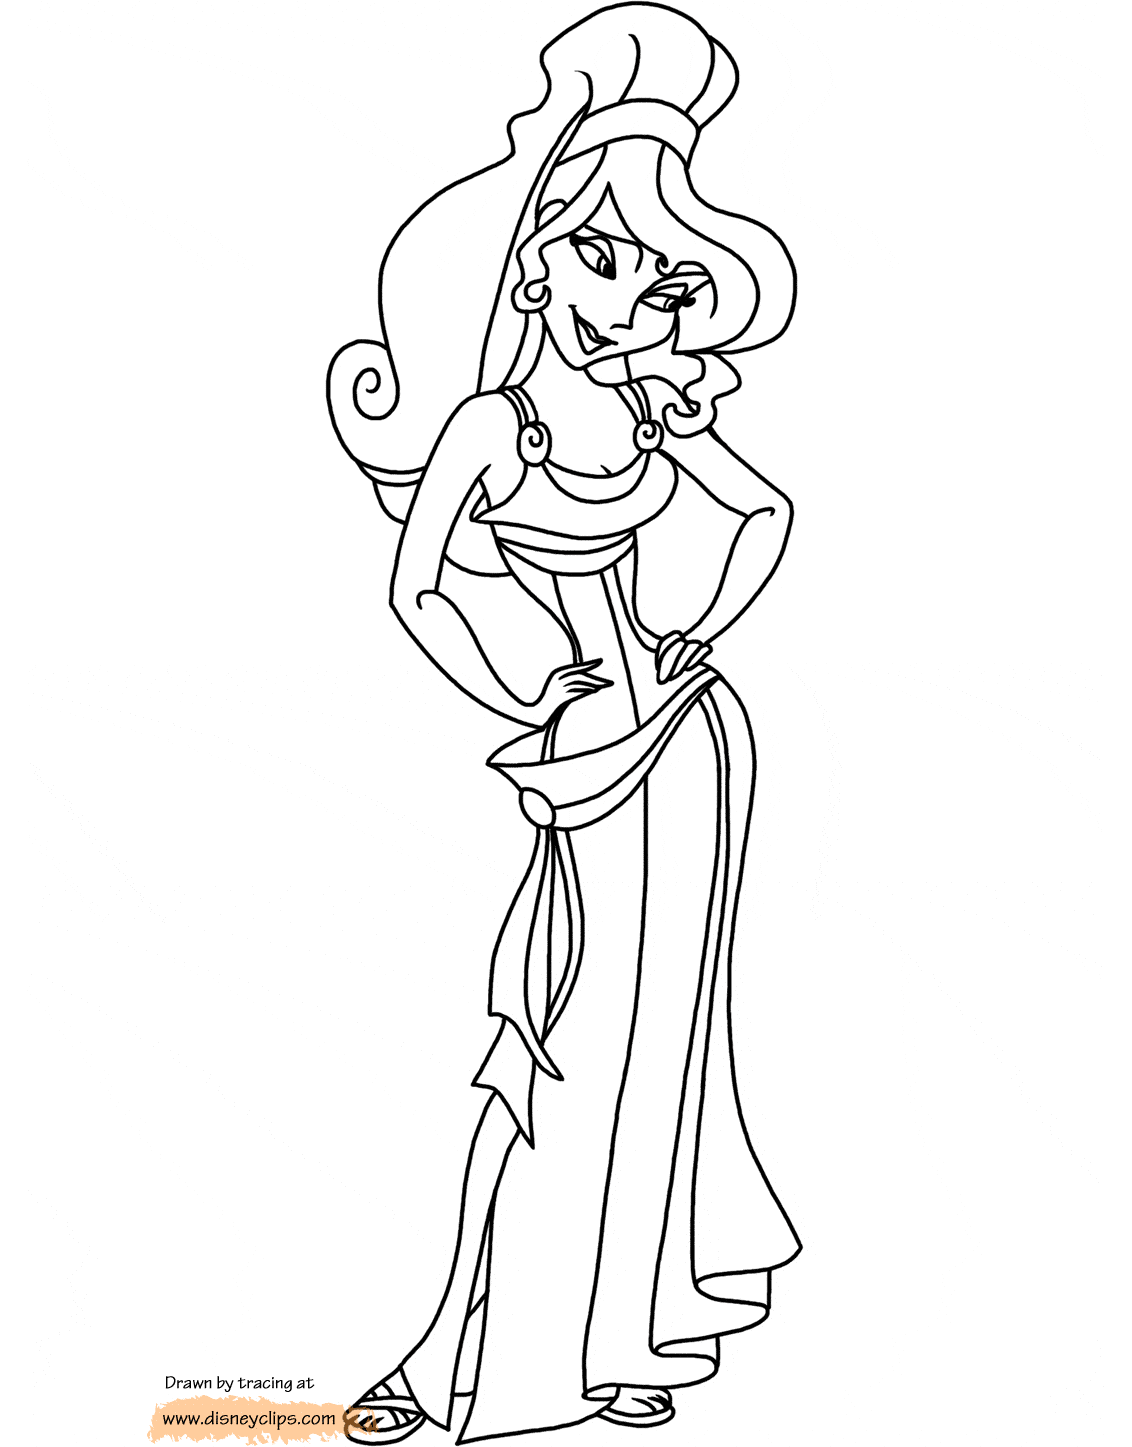 Hercules Meg coloring page Megara with hands on hips